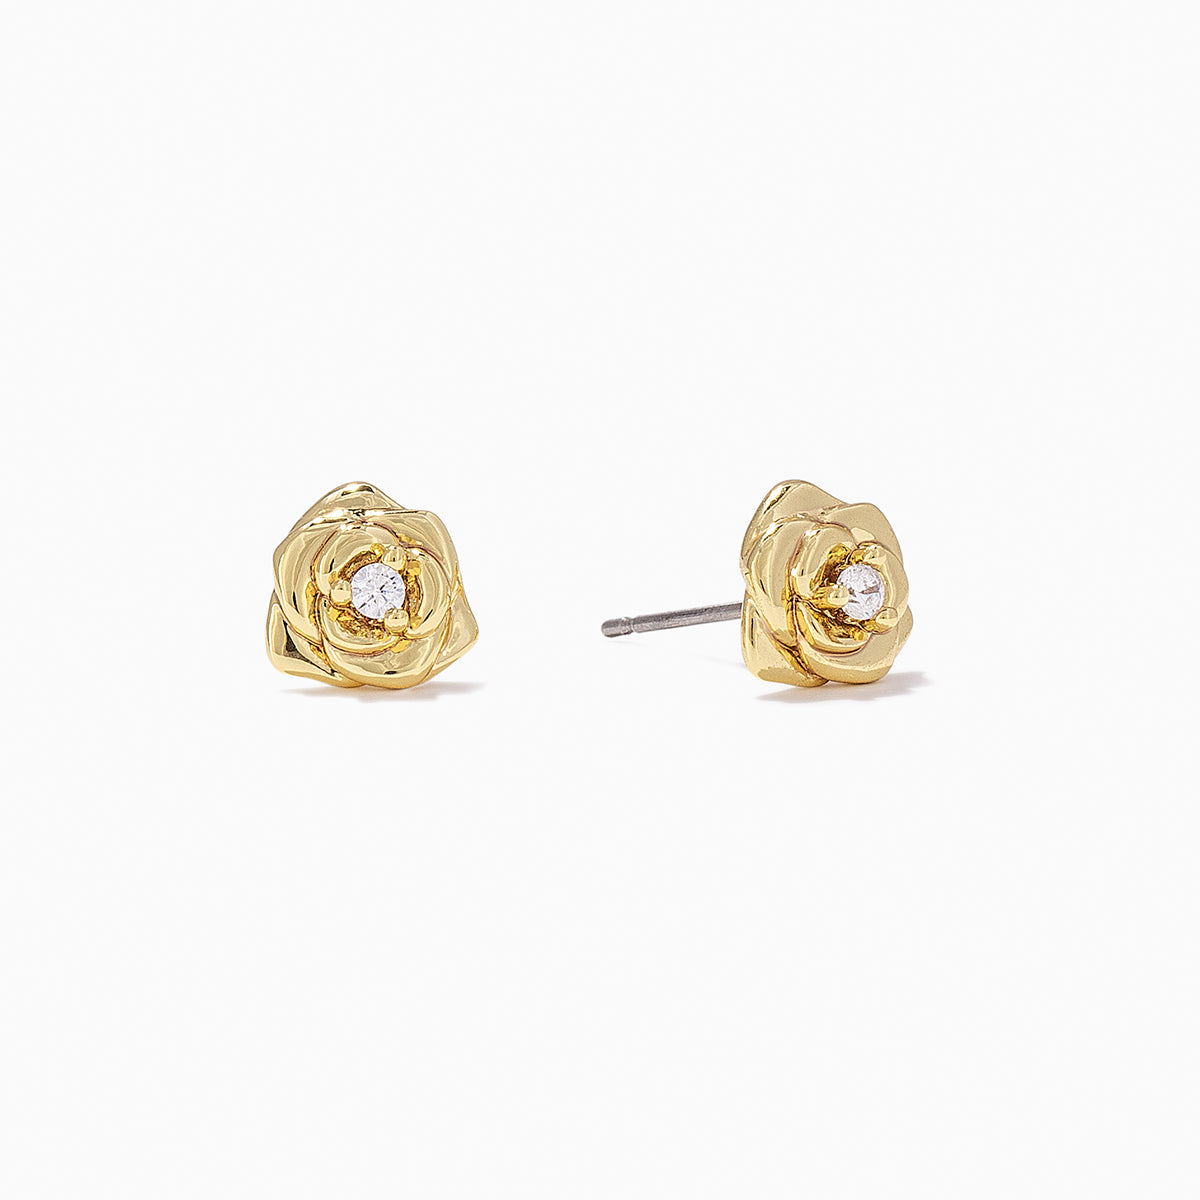 Rose Stud Earrings | Gold | Product Image | Uncommon James